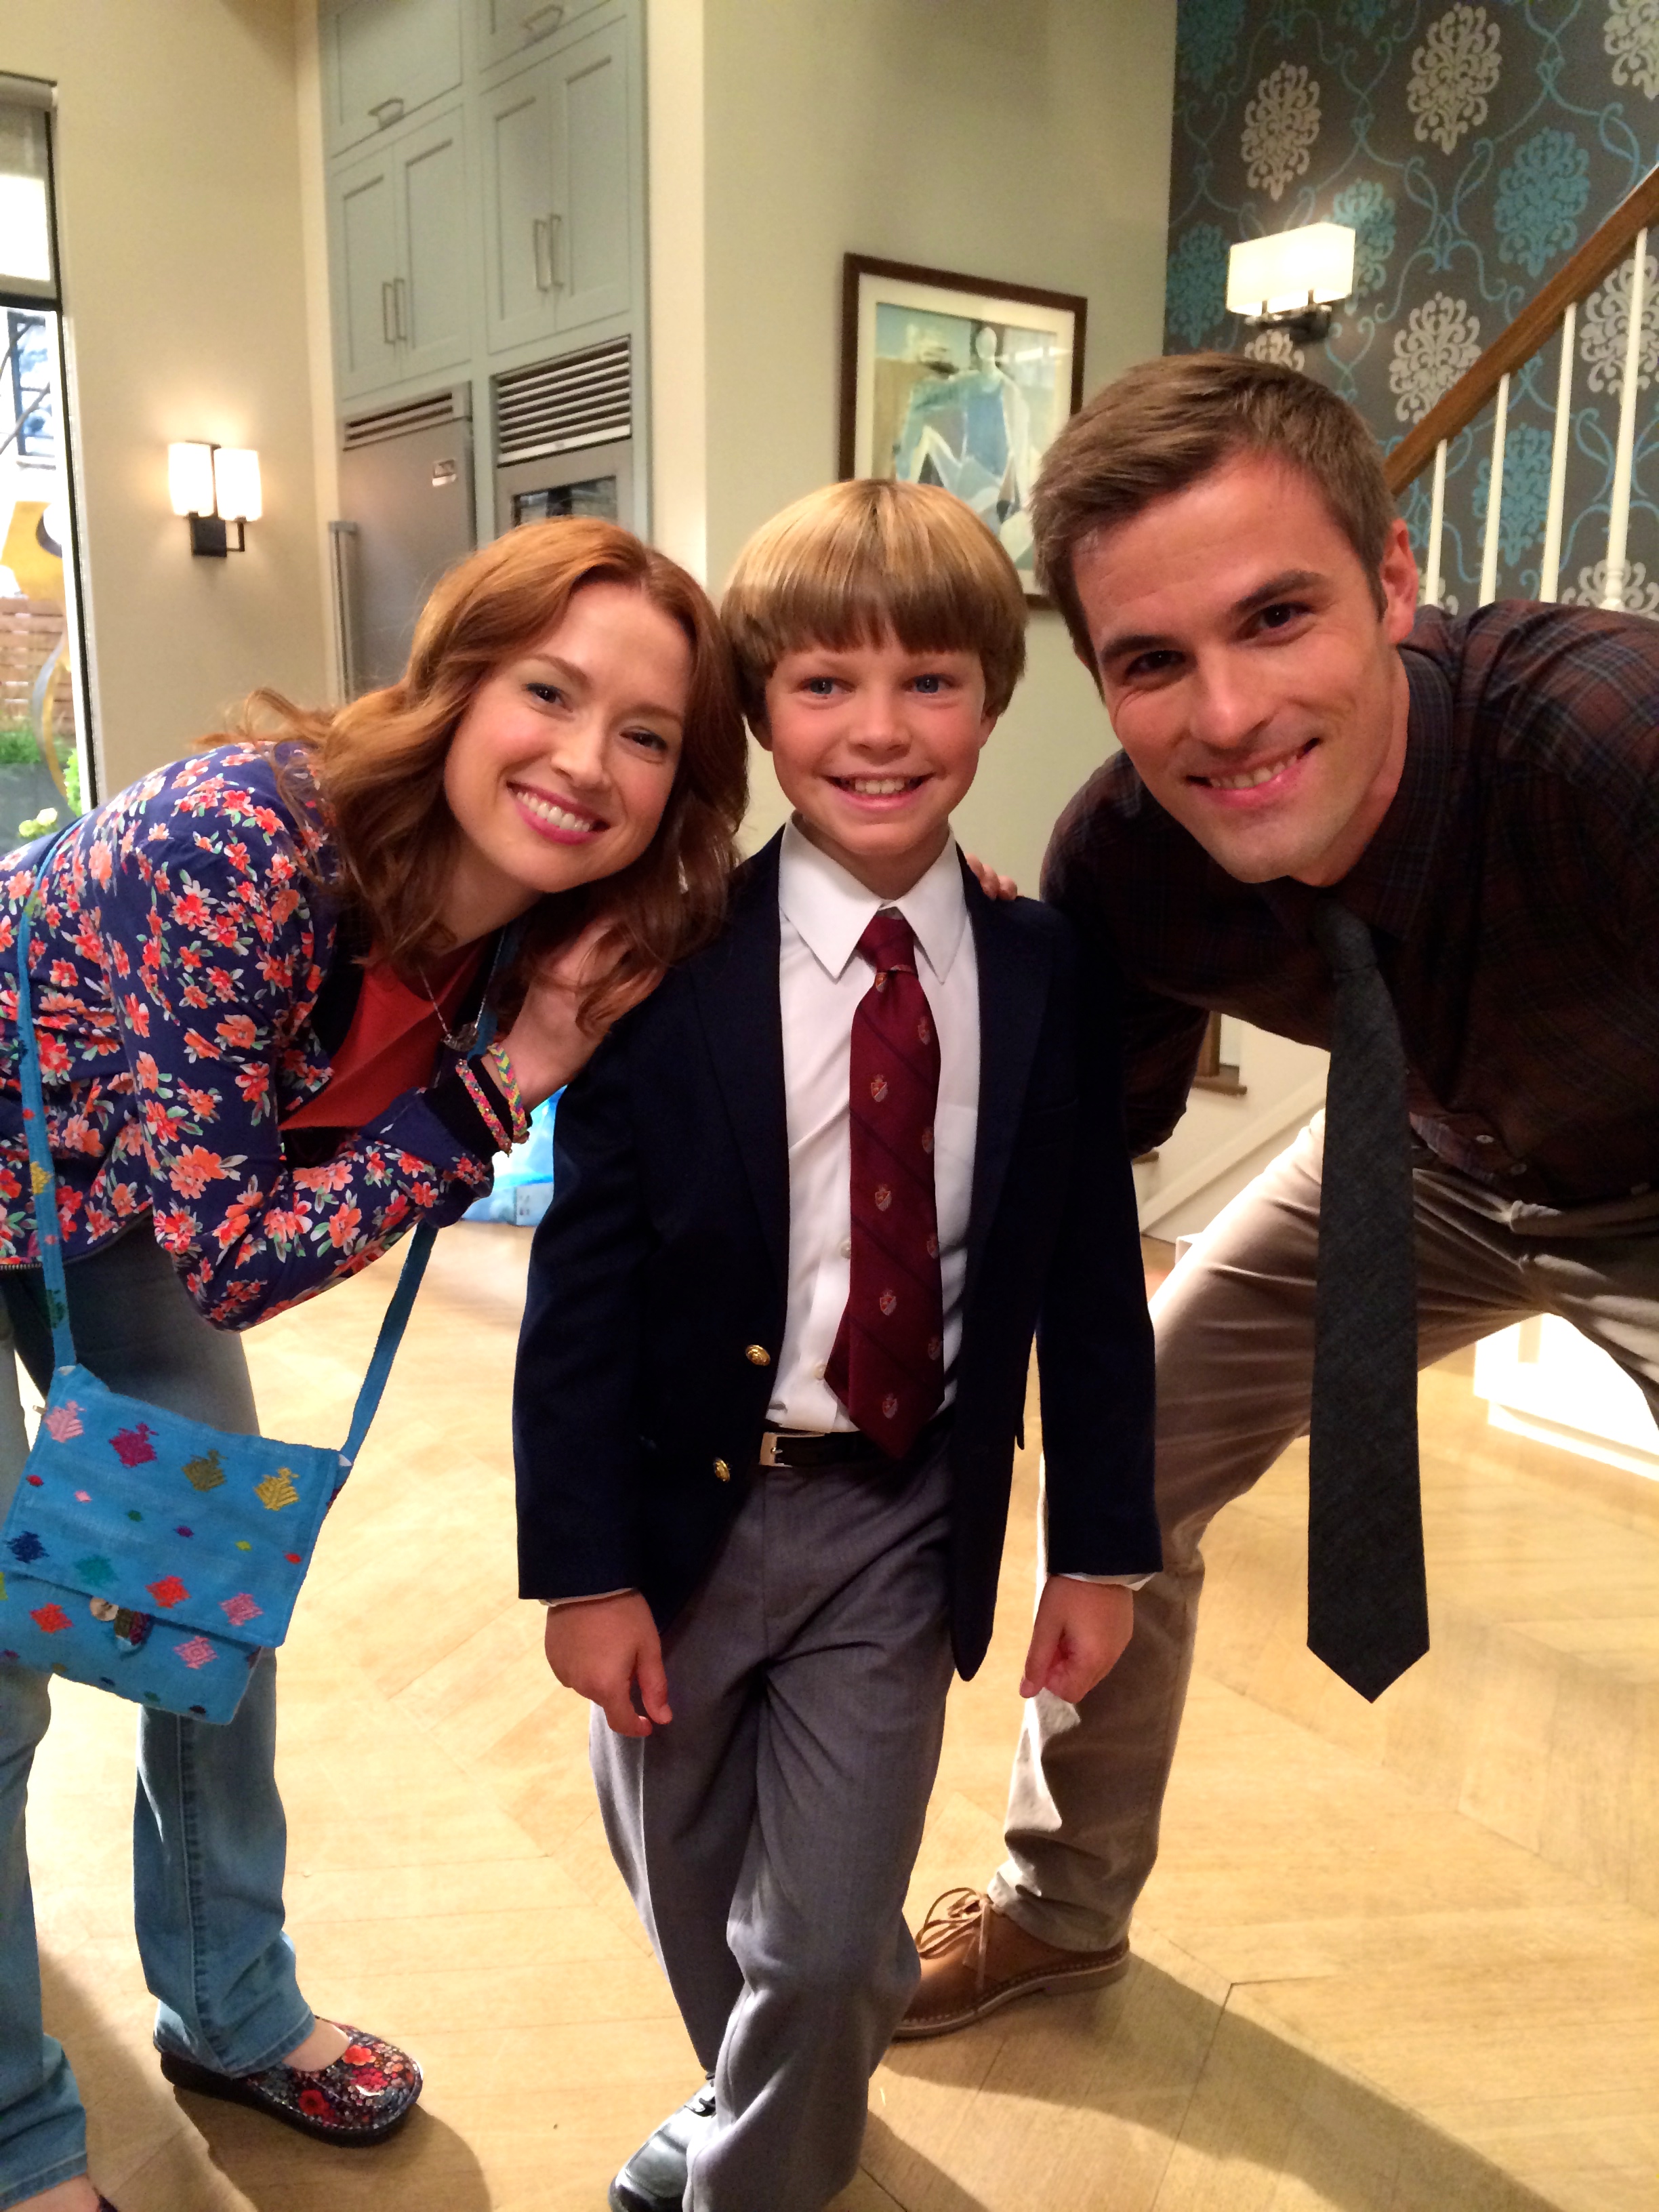 Tanner Flood: Unbreakable Kimmy Schmidt with Ellie Kemper & Andy Ridings